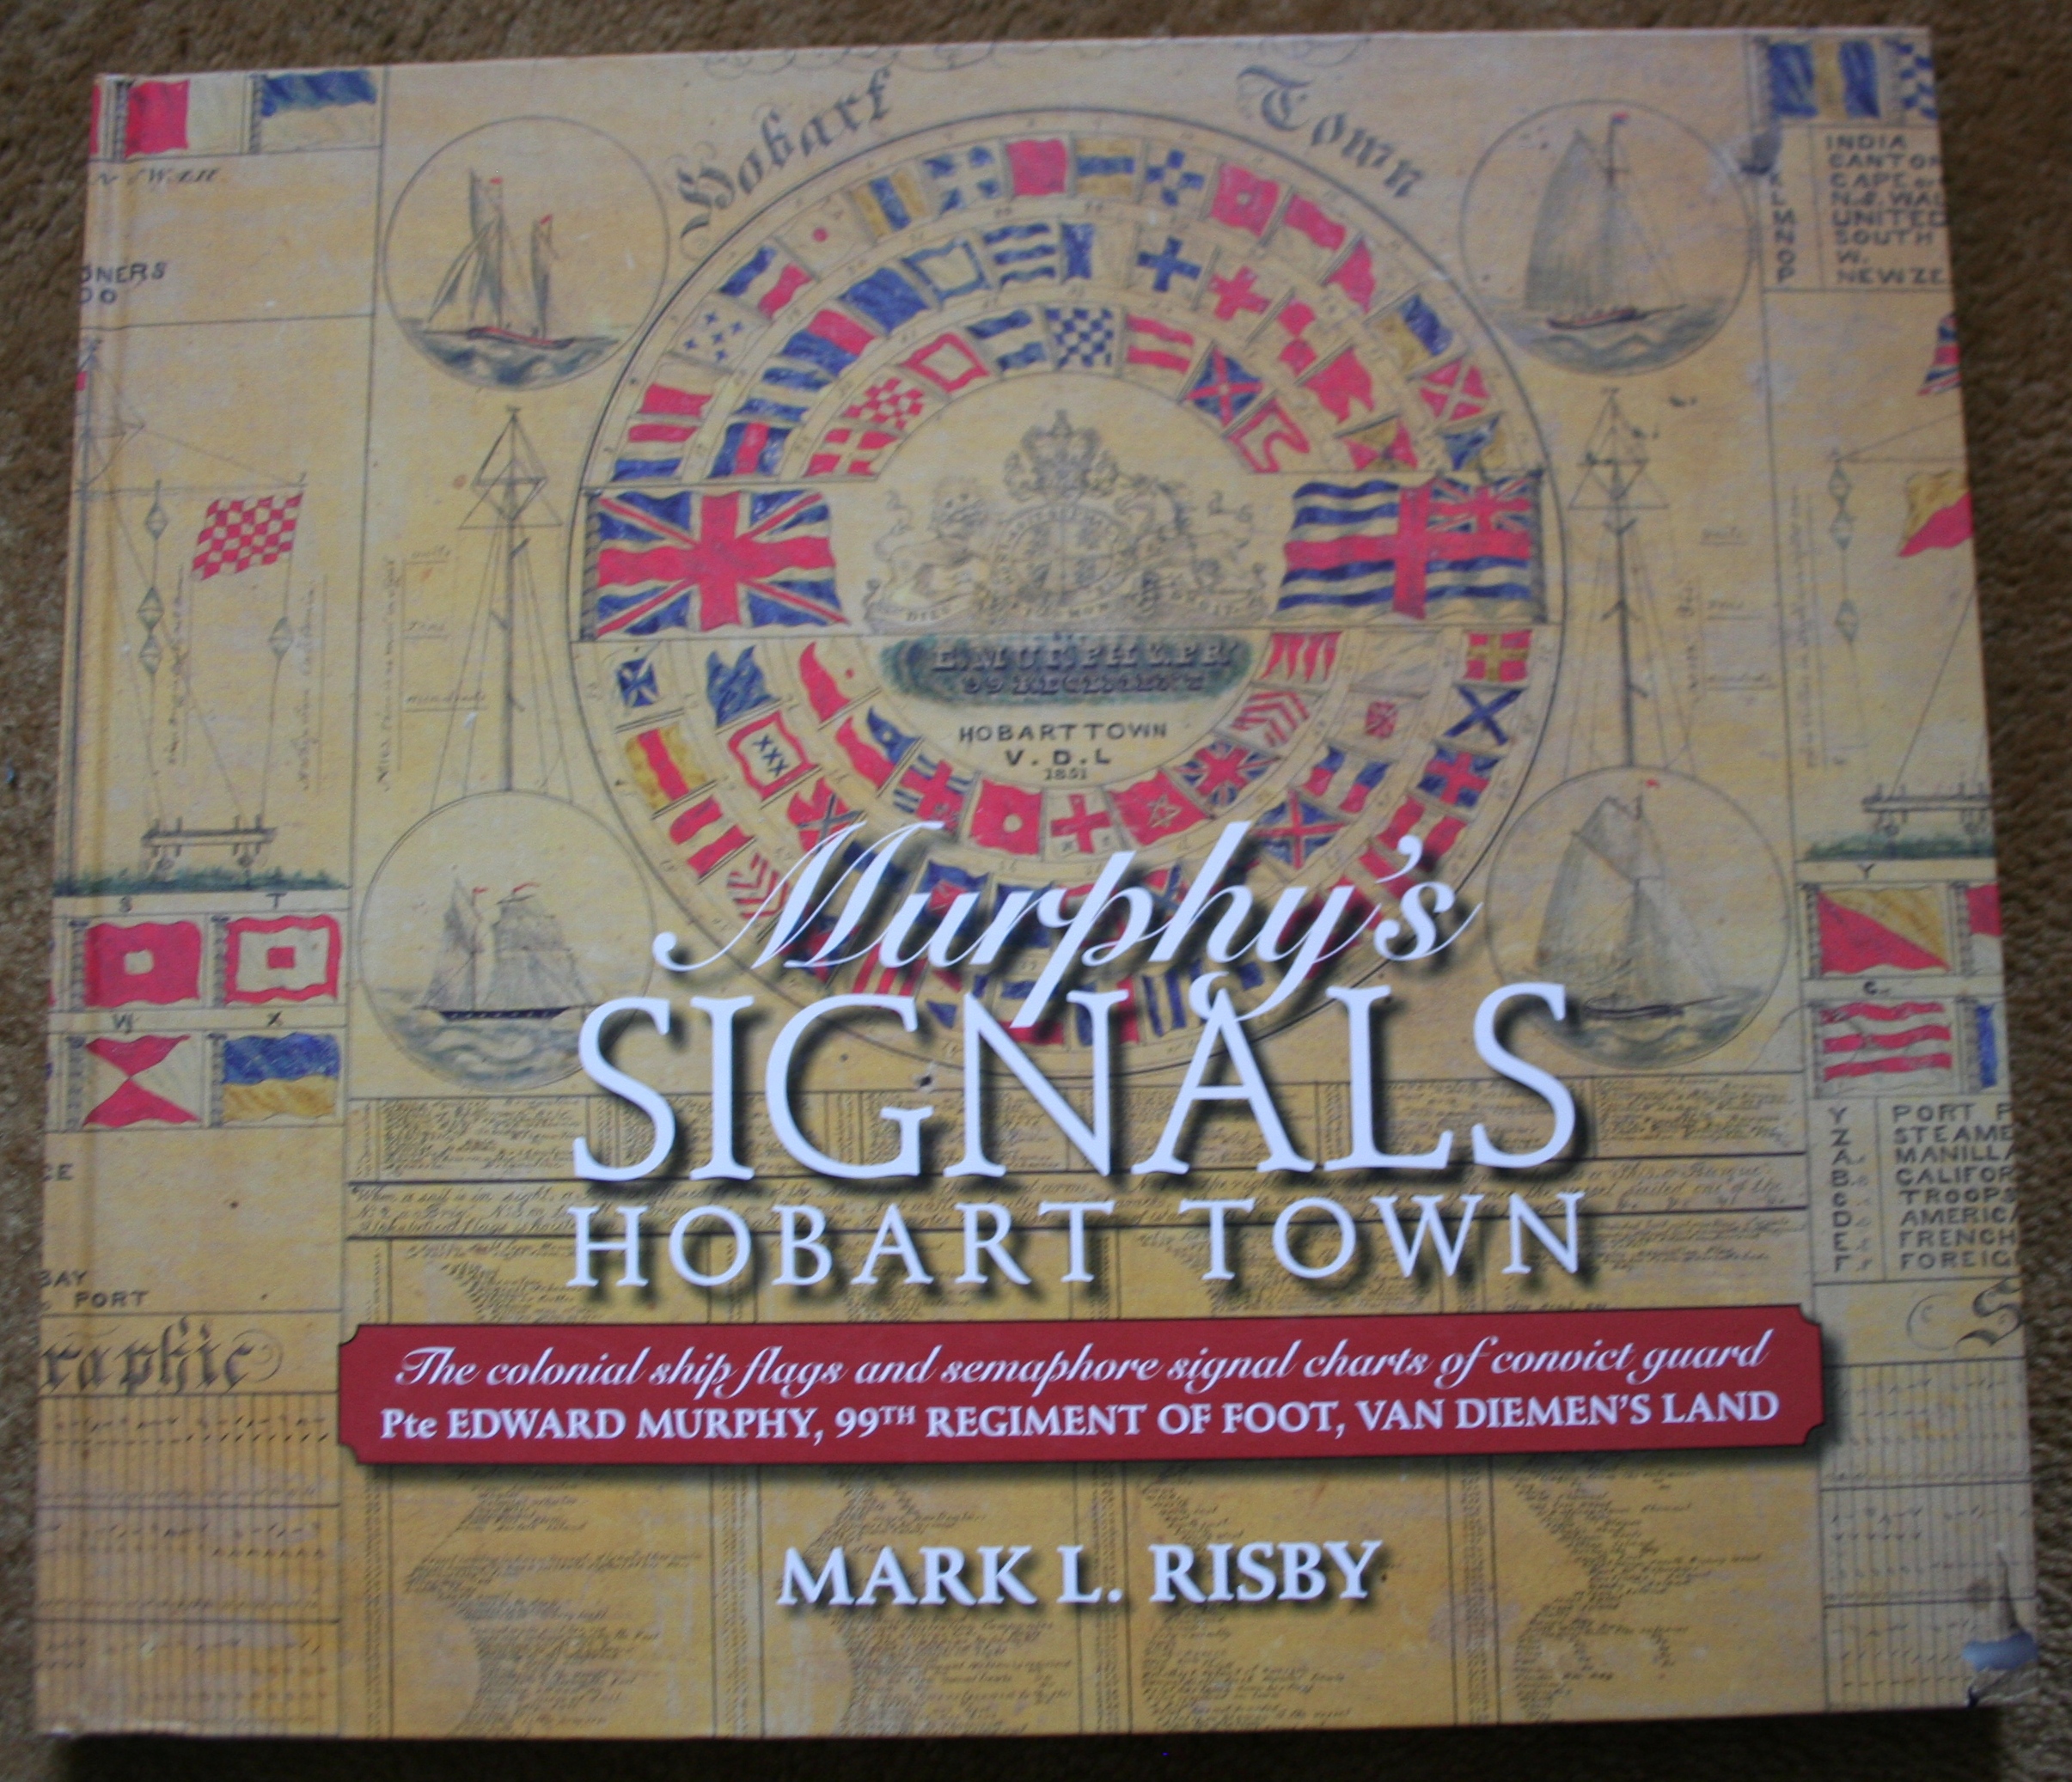 Murphy's Signals Hobart Town - colonial ship flags and semaphore signal charts